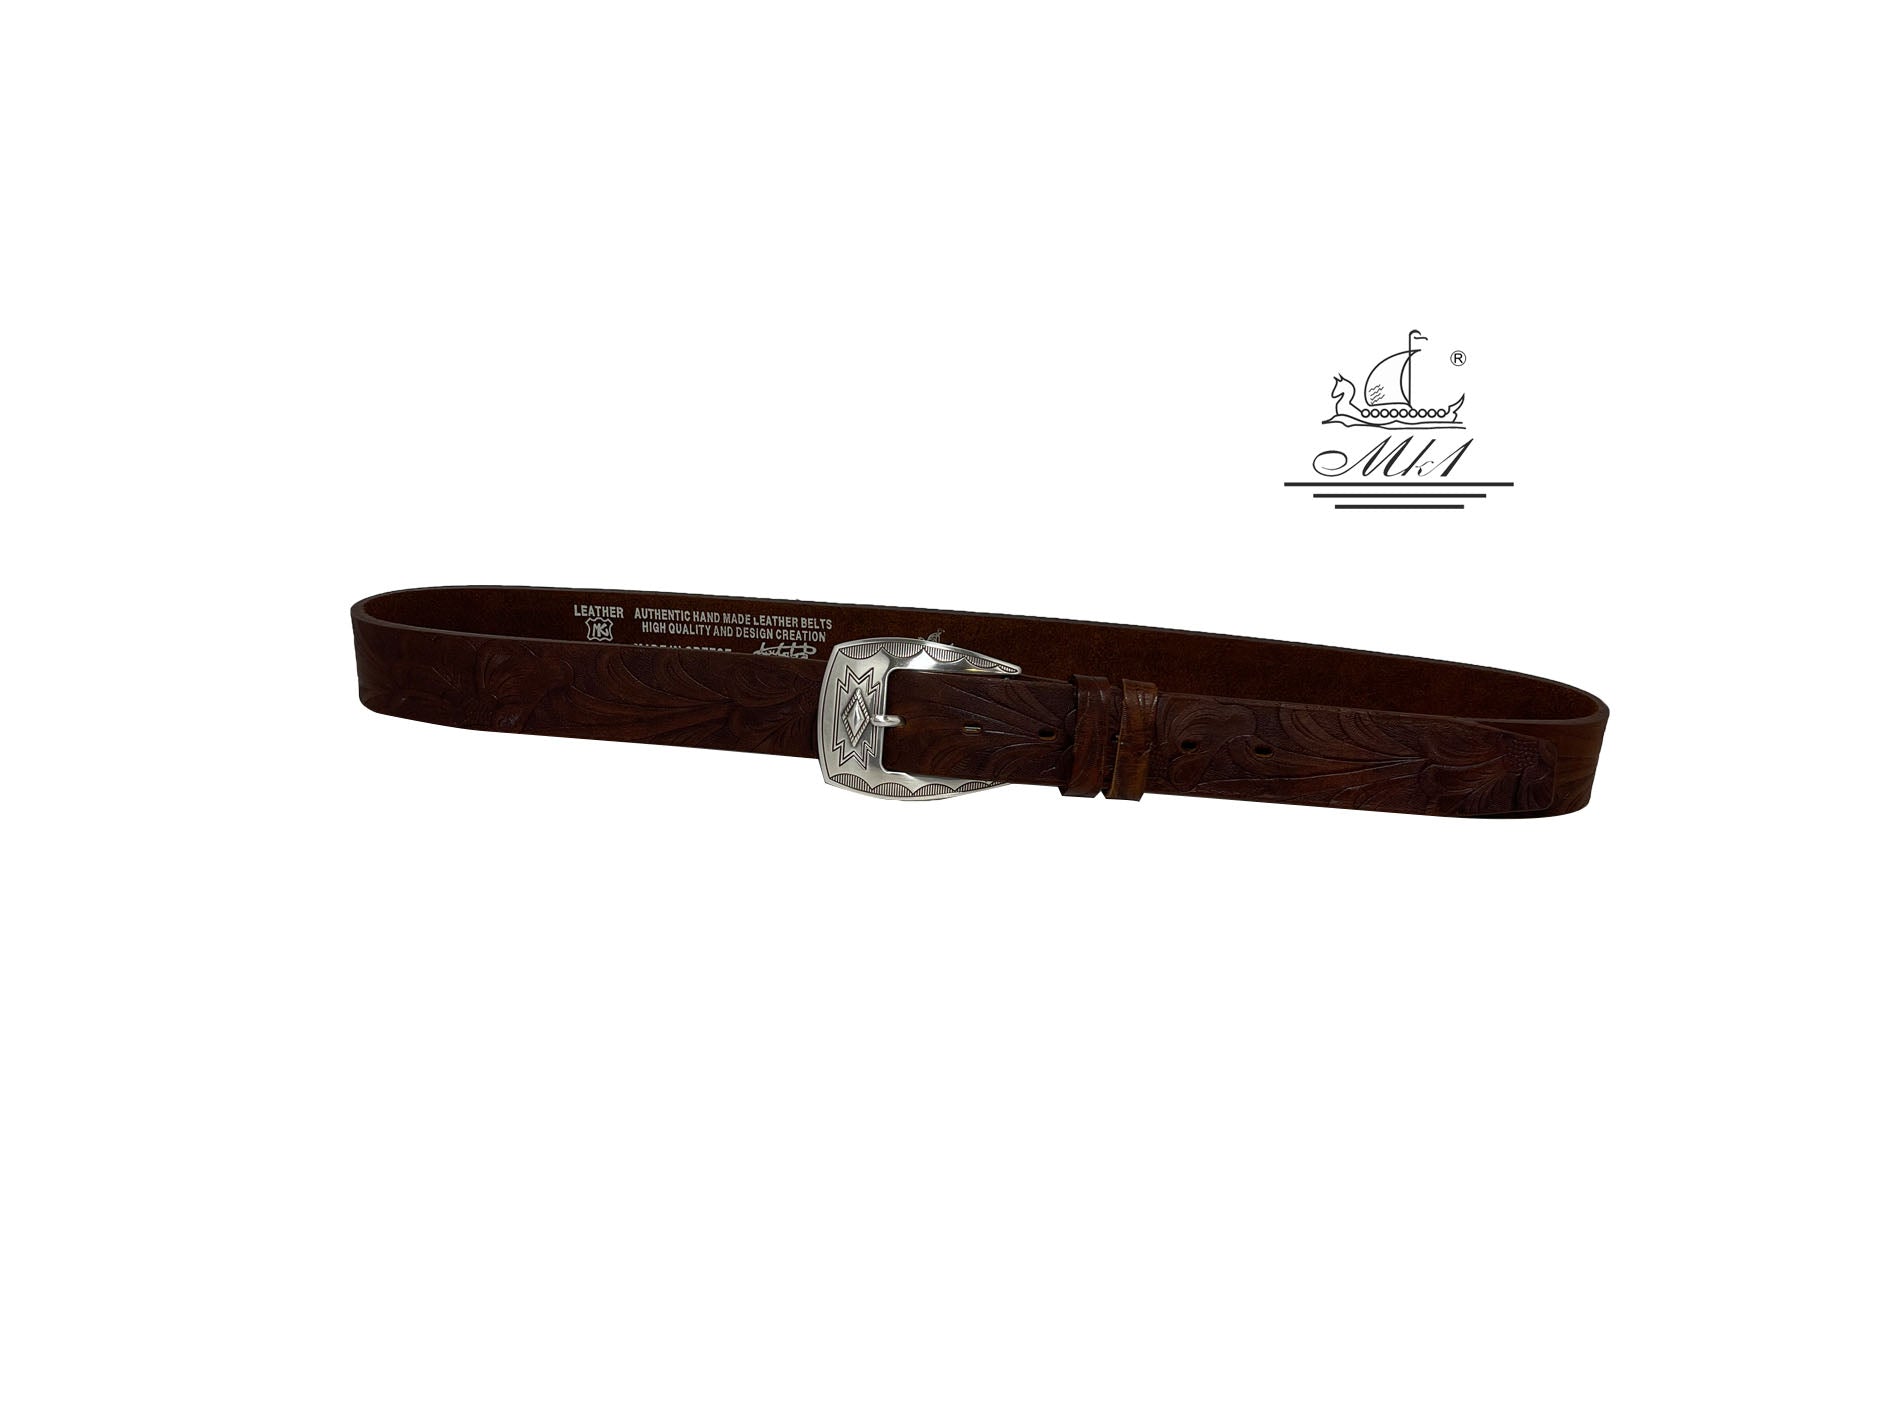 Unisex 4cm wide belt handcrafted from brown leather with flower design.A003/35BR/LD